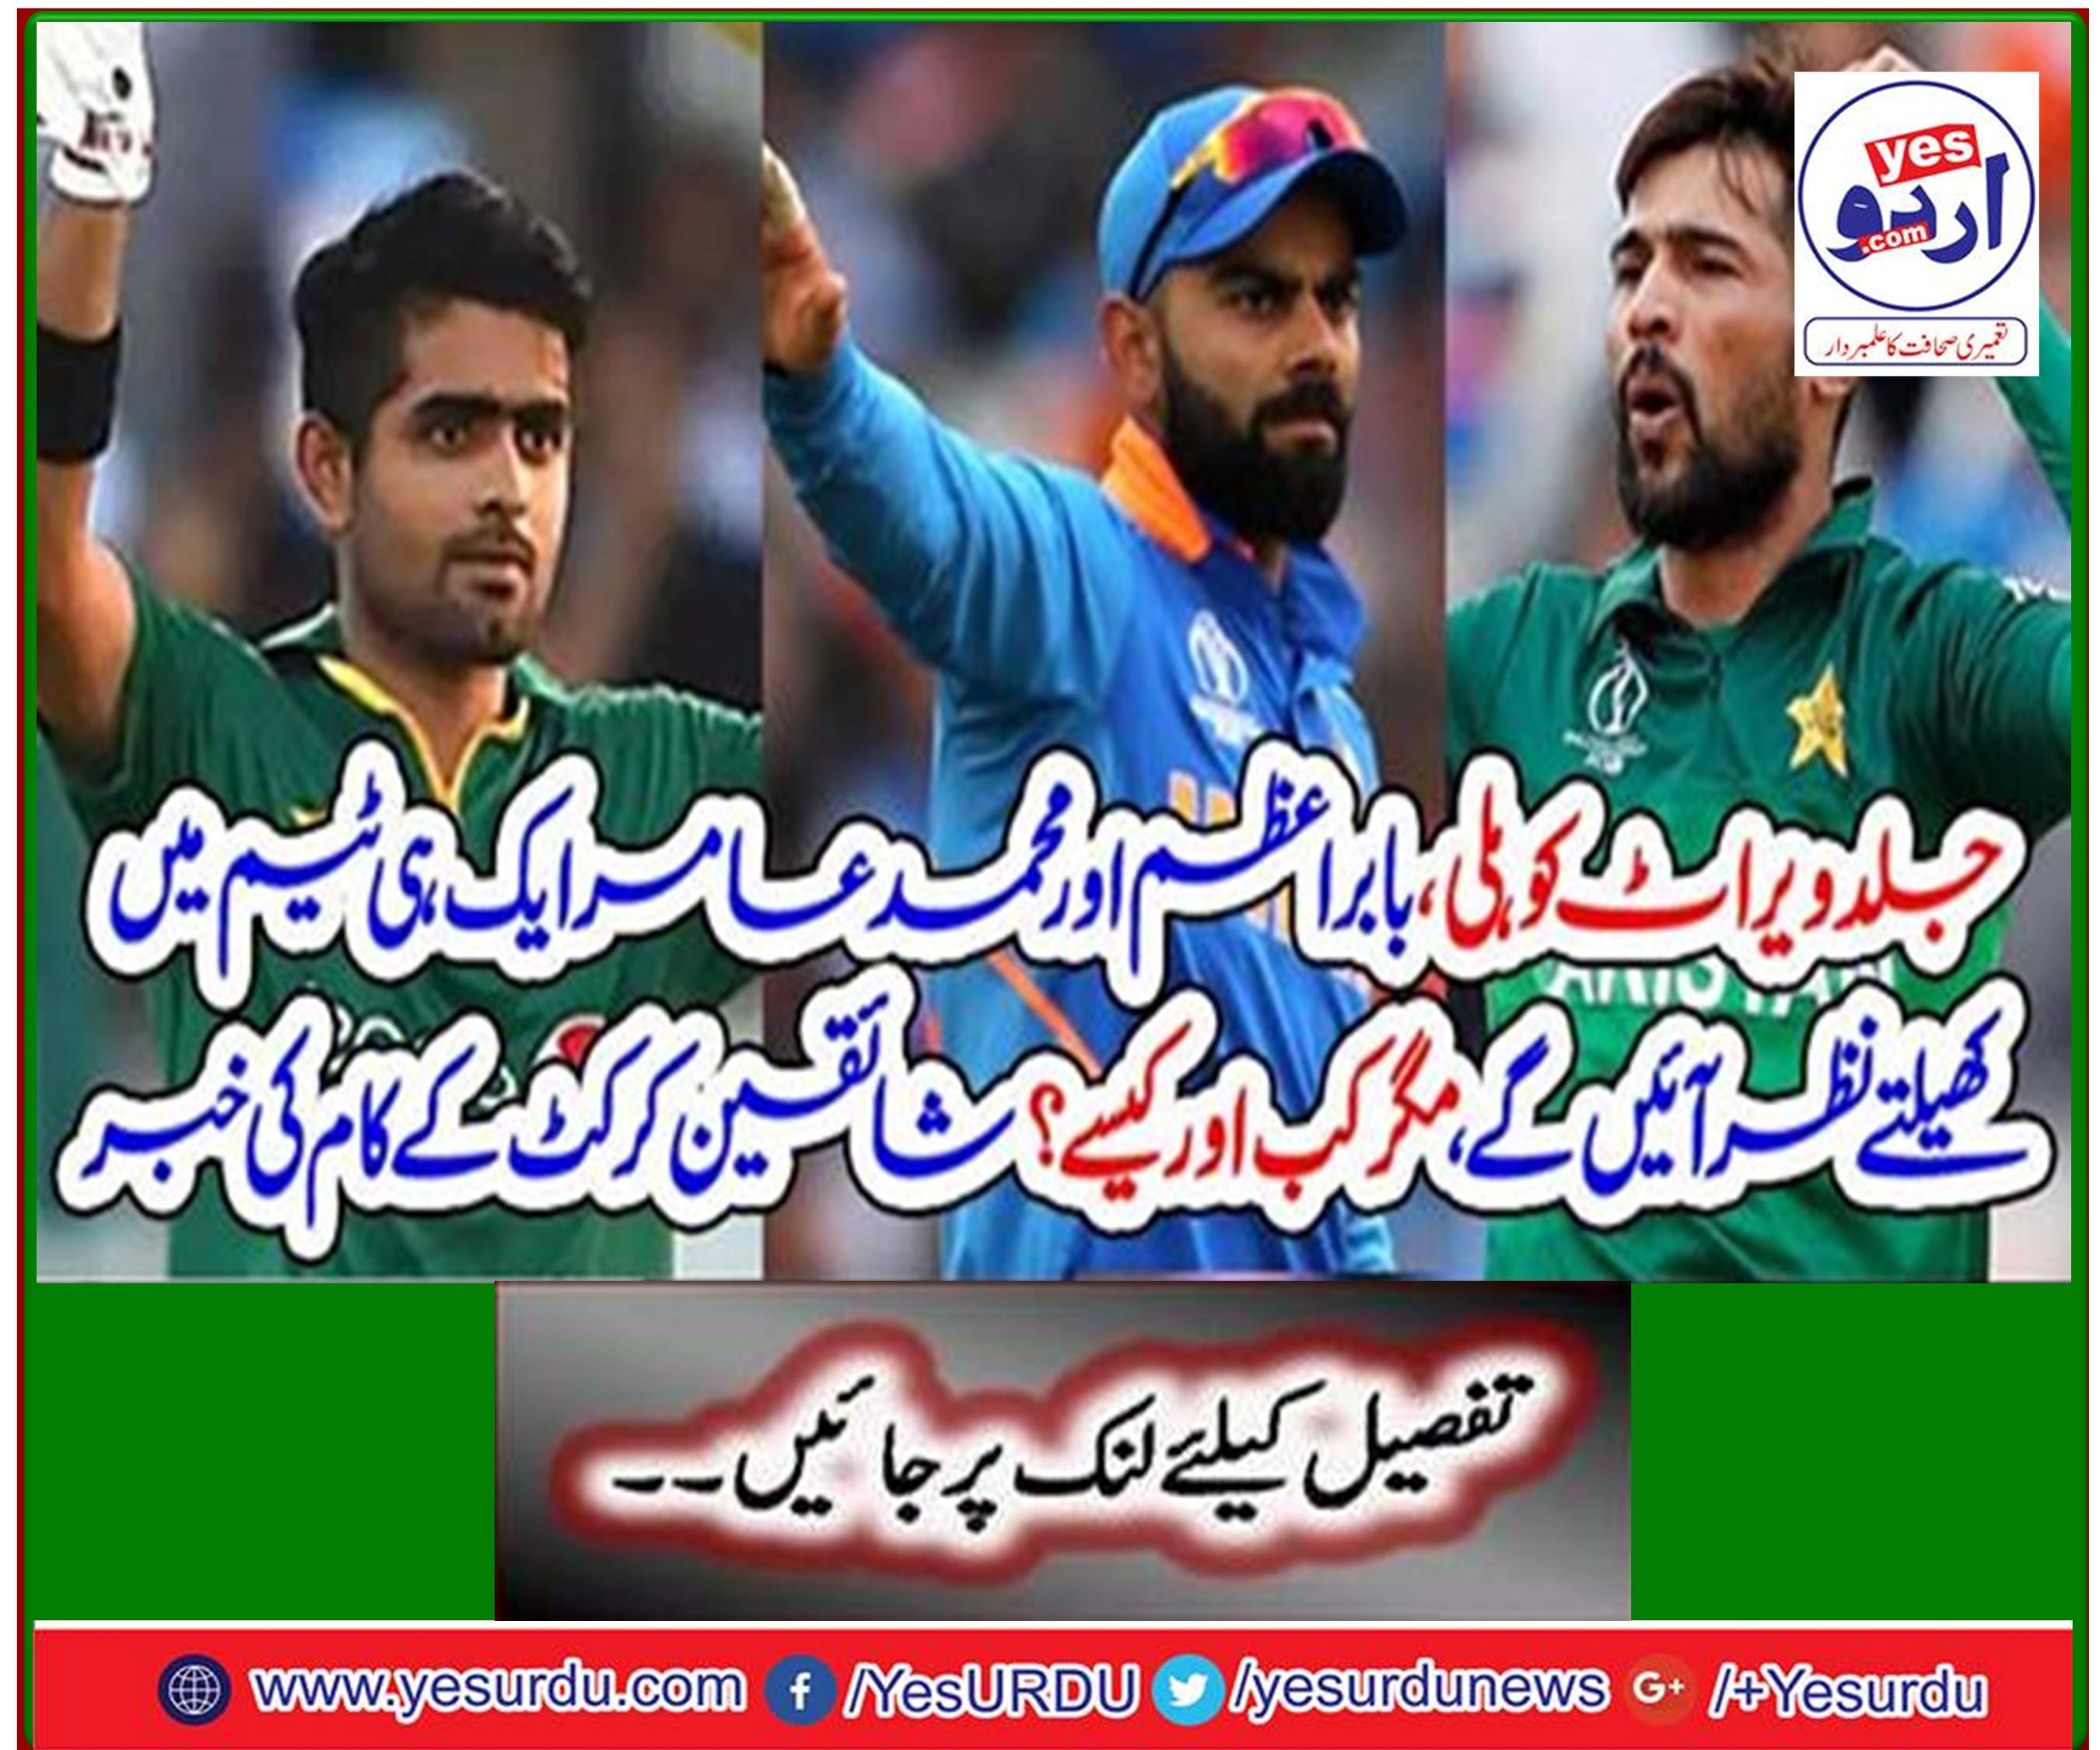 Soon Virat Kohli, Babar Azam and Mohammad Amir will be playing in the same team, but when and how? Fans report the work of cricket